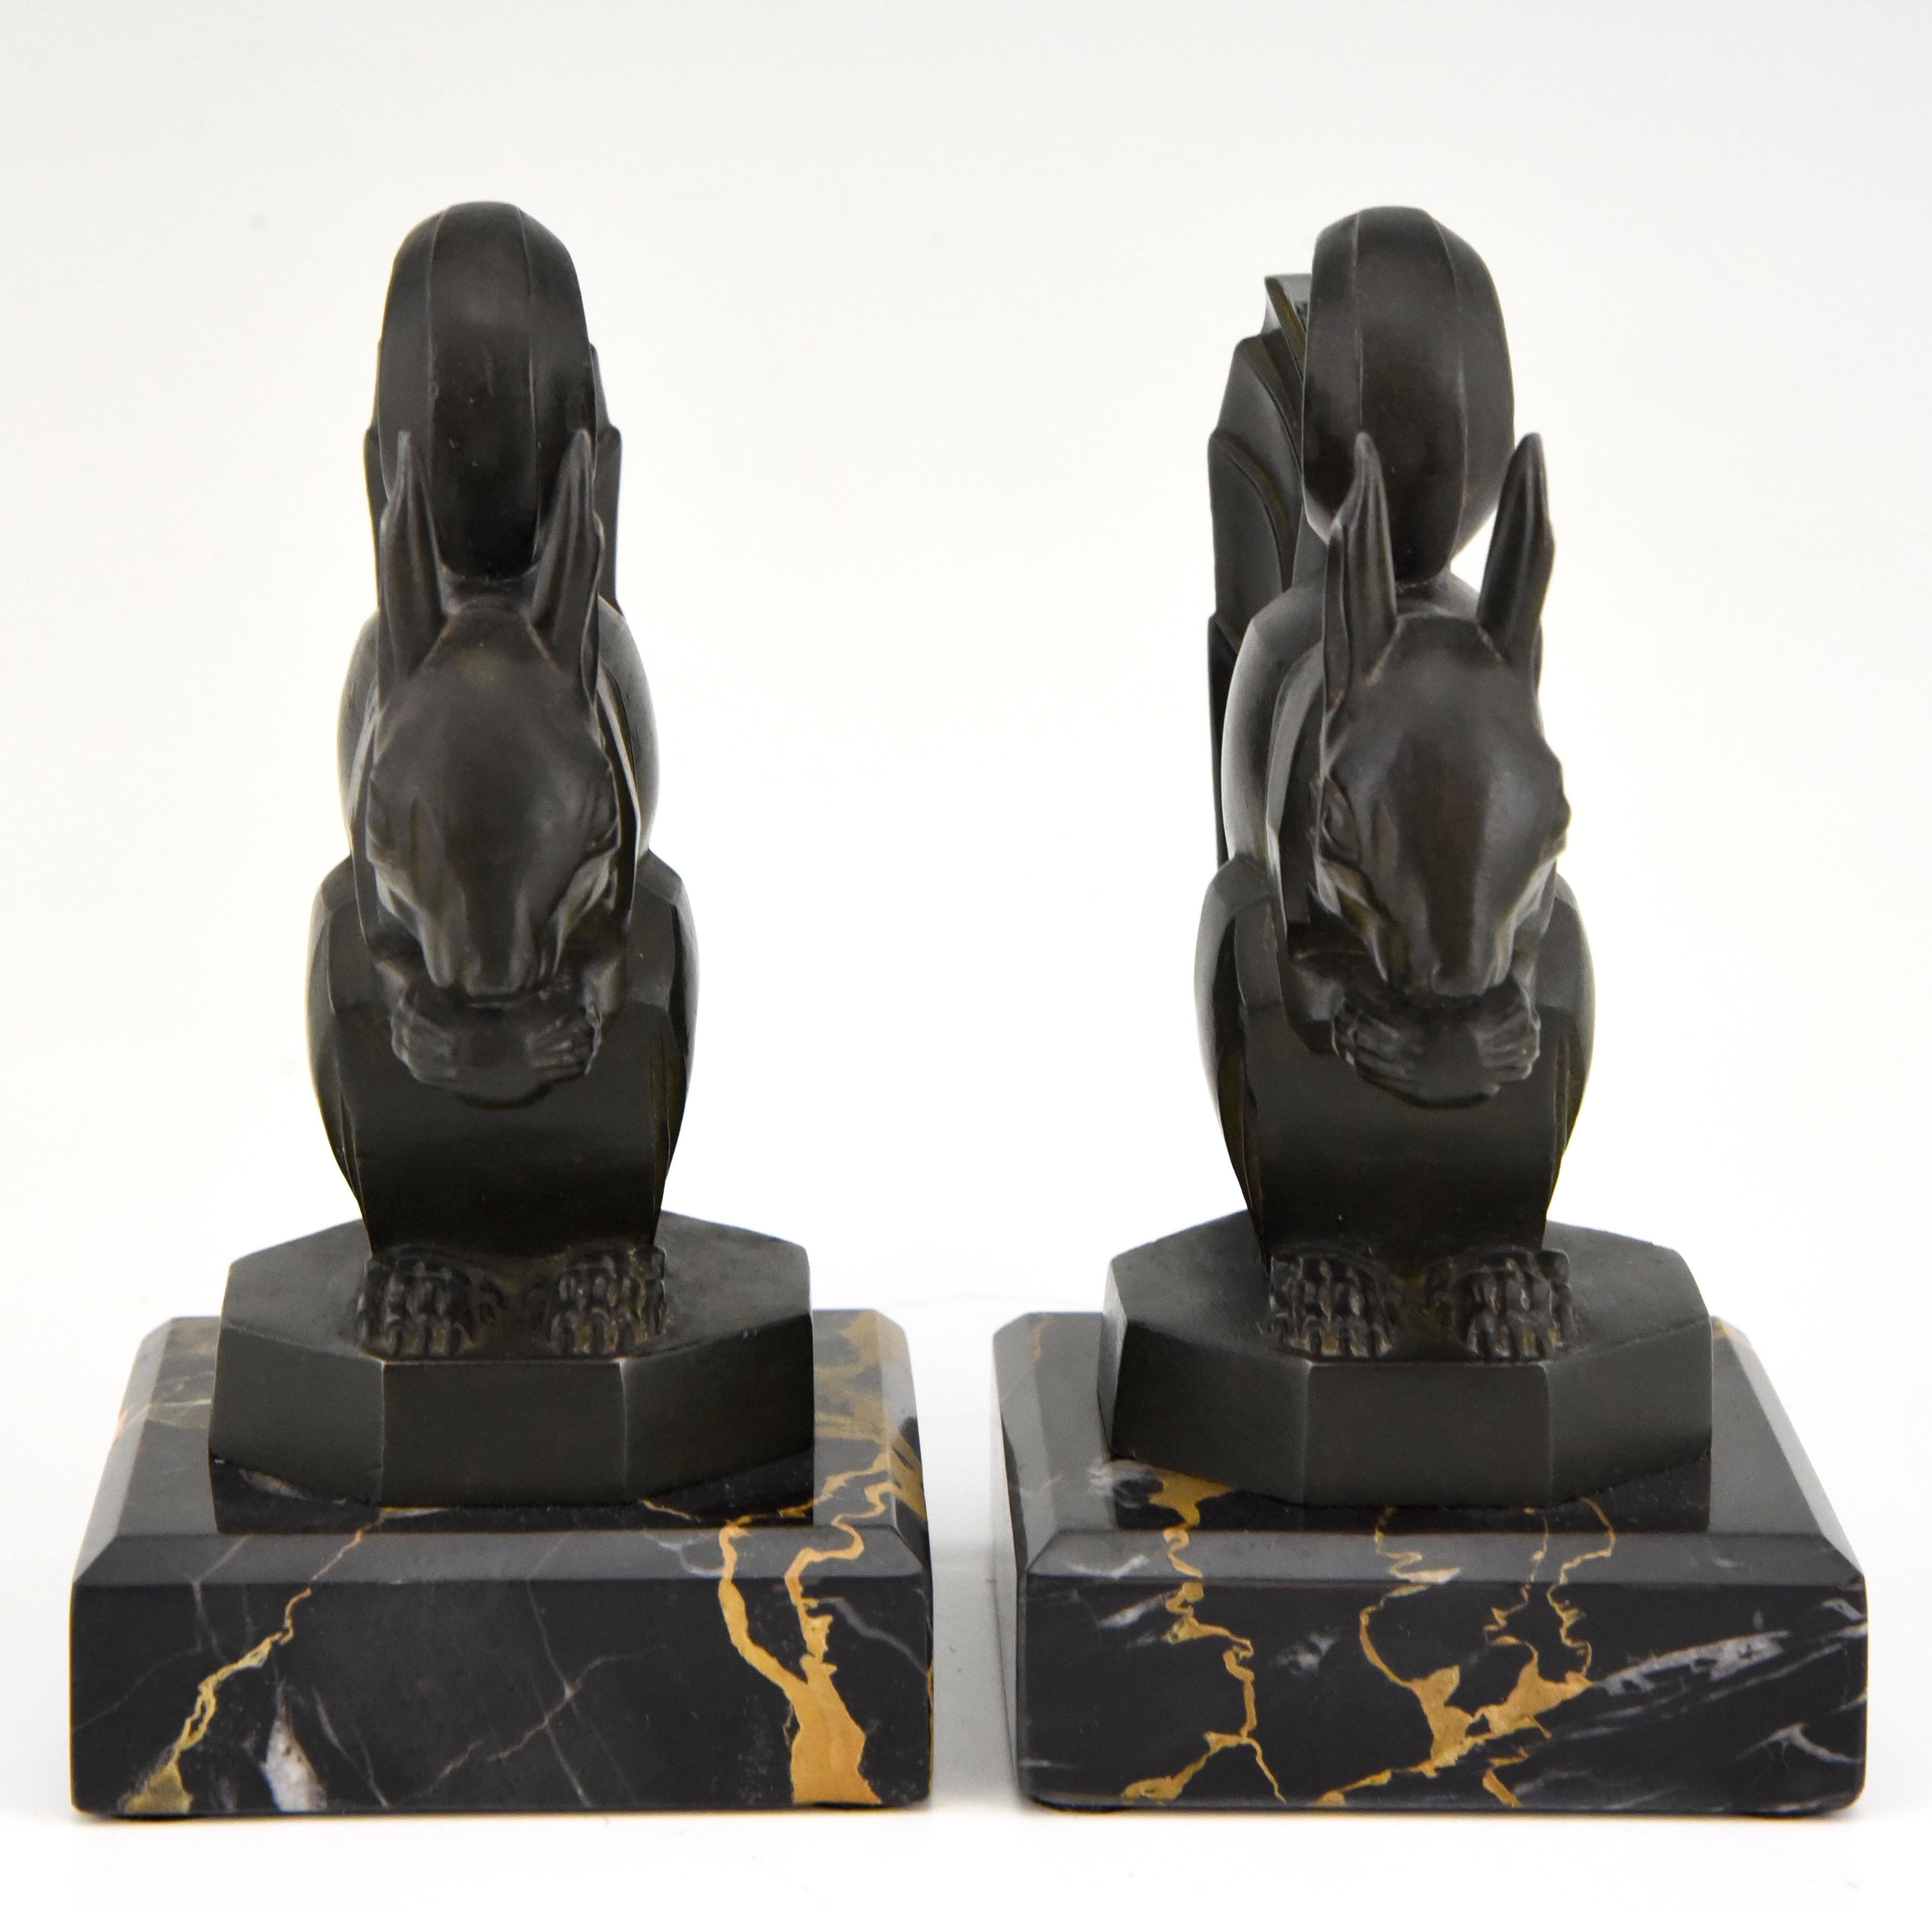 French Art Deco Squirrel Bookends Max Le Verrier France 1930 Original